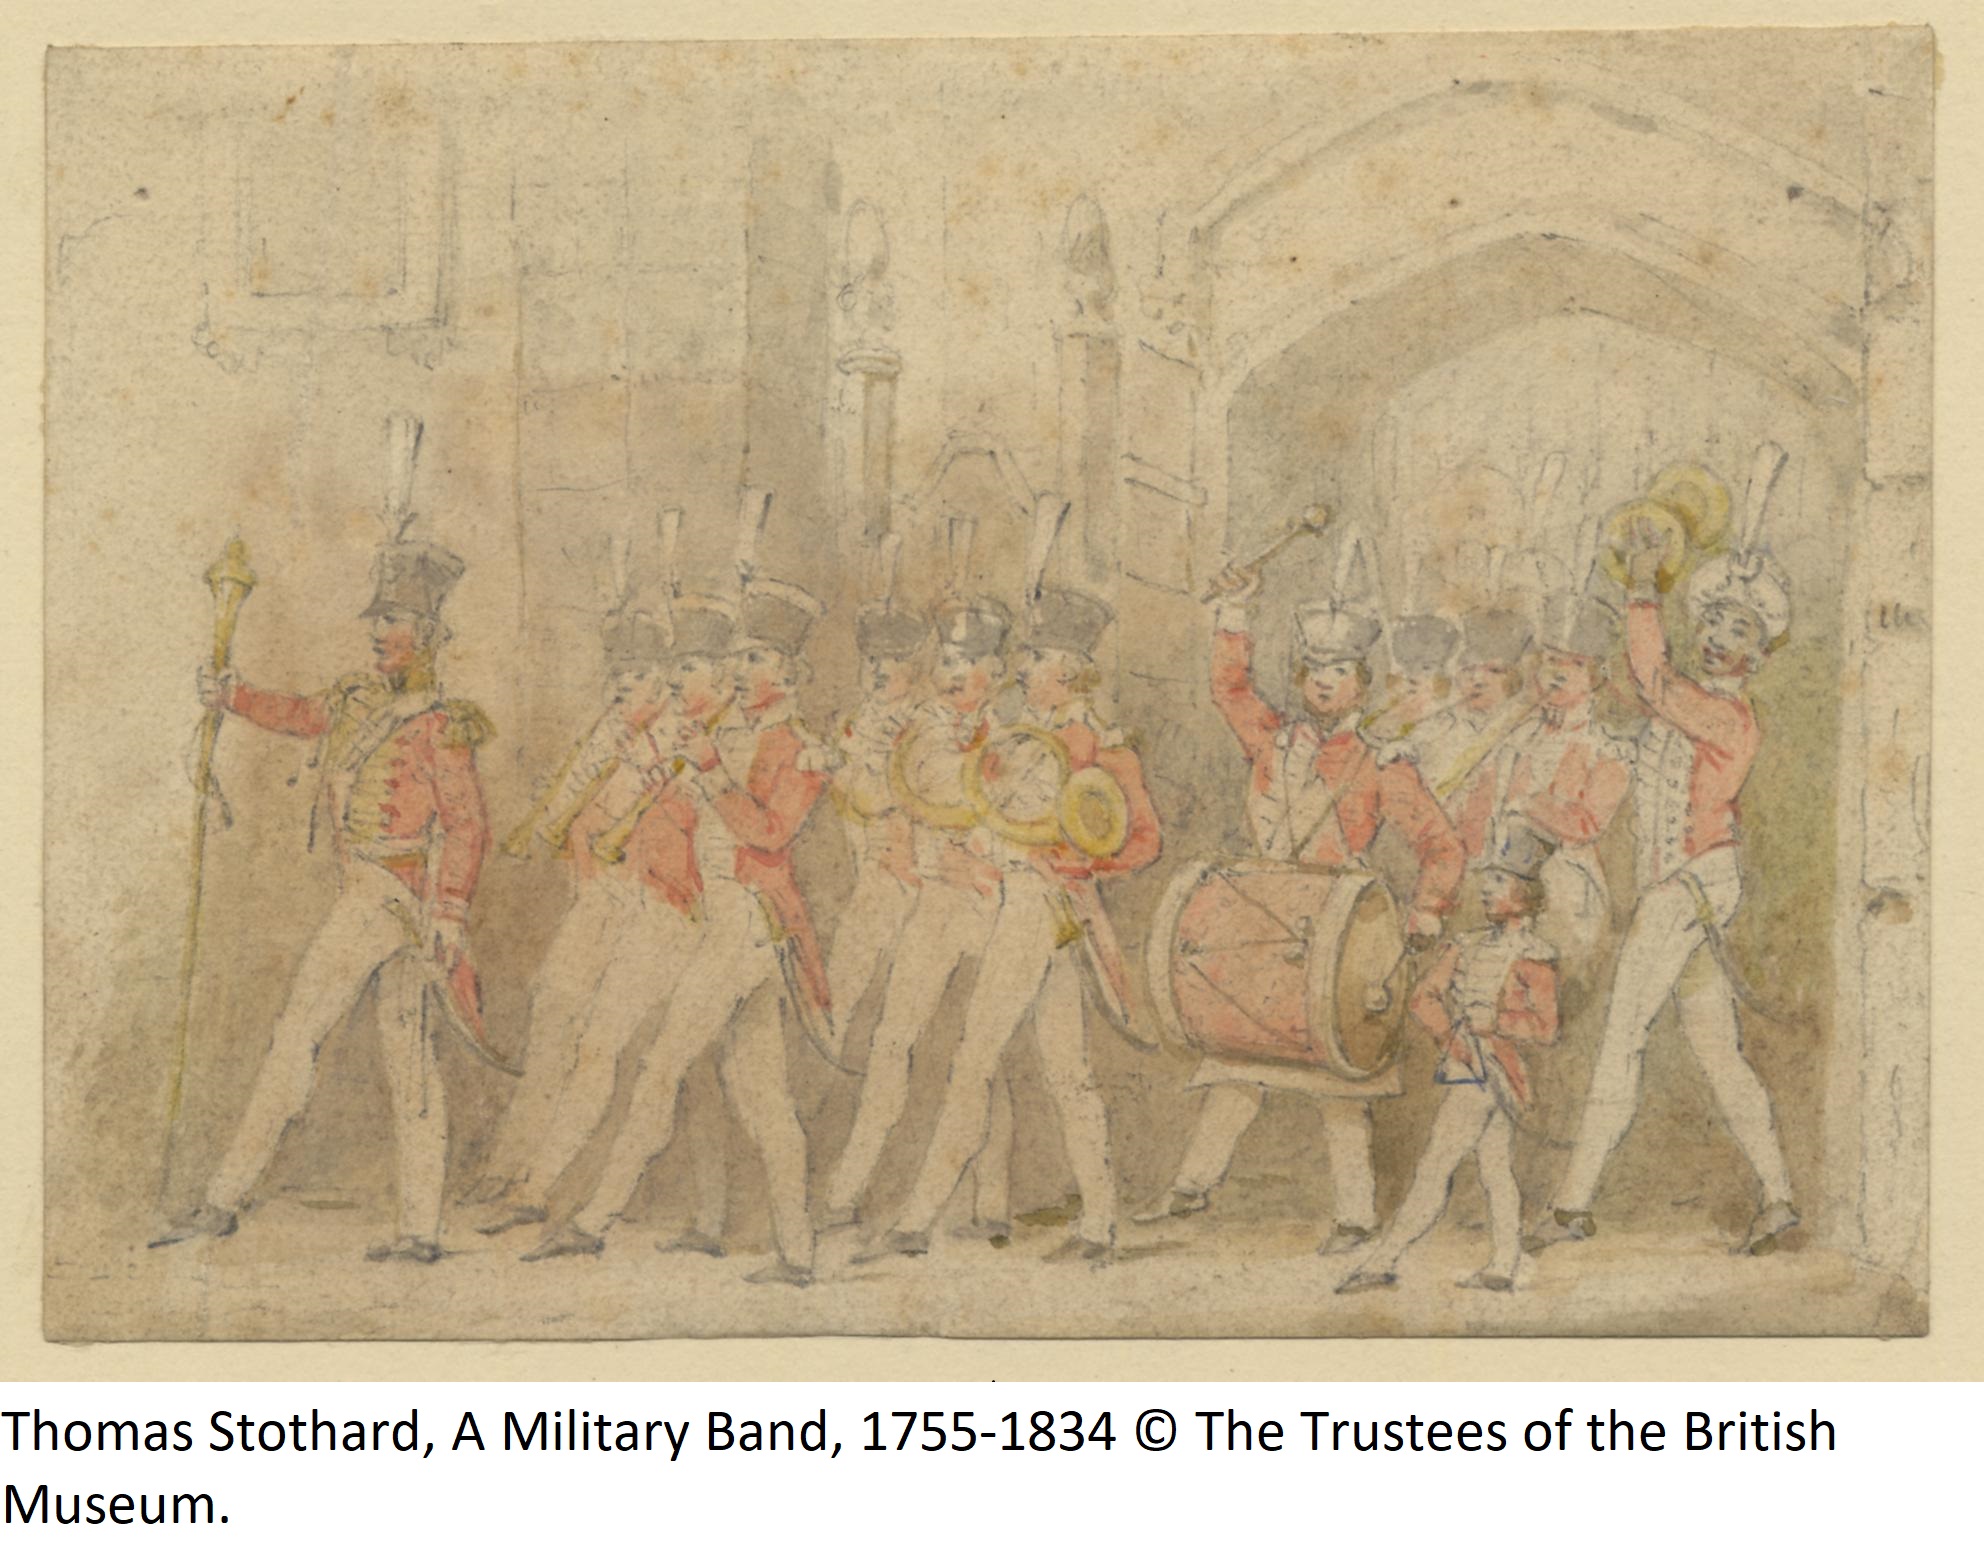 Thomas Stothard, A Military Band, 1755-1834 © The Trustees of the British Museum.